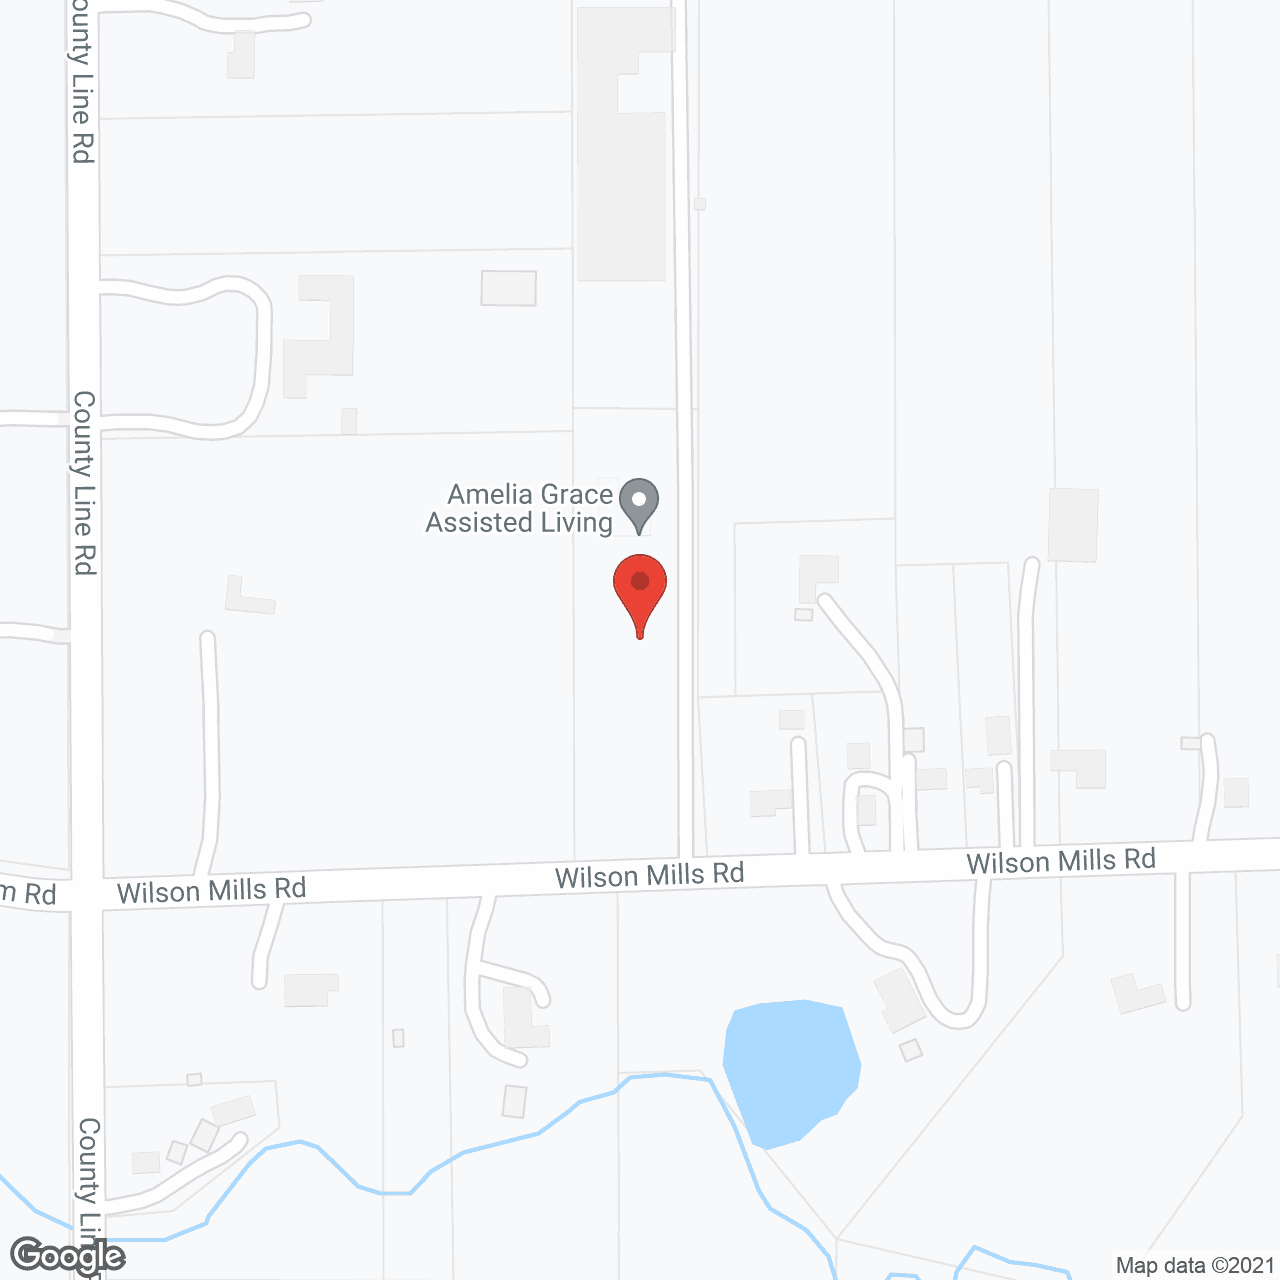 Amelia Grace Assisted Living in google map